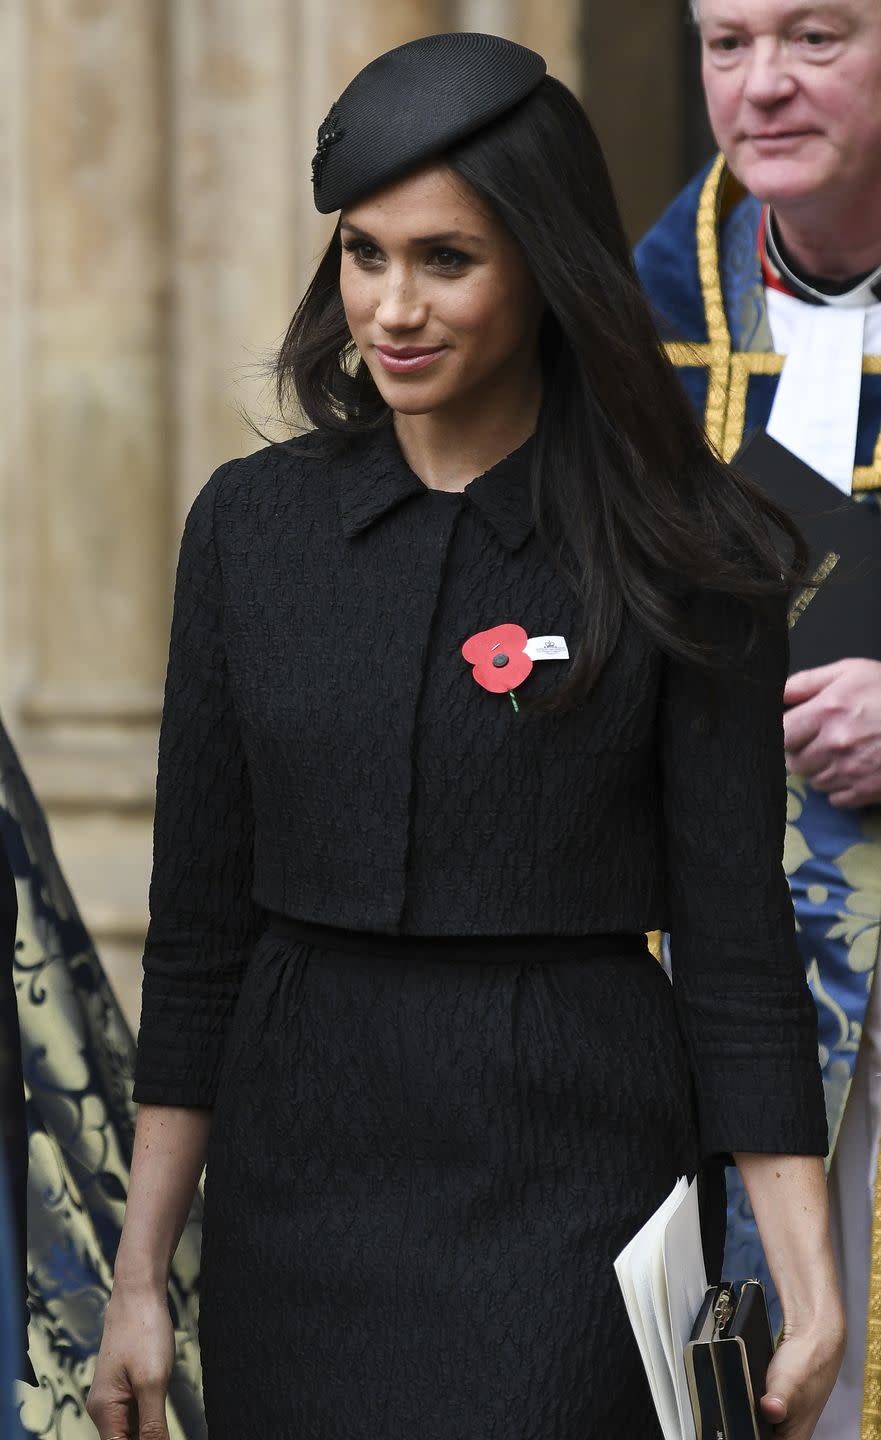 Meghan in Black With Poppy Pins